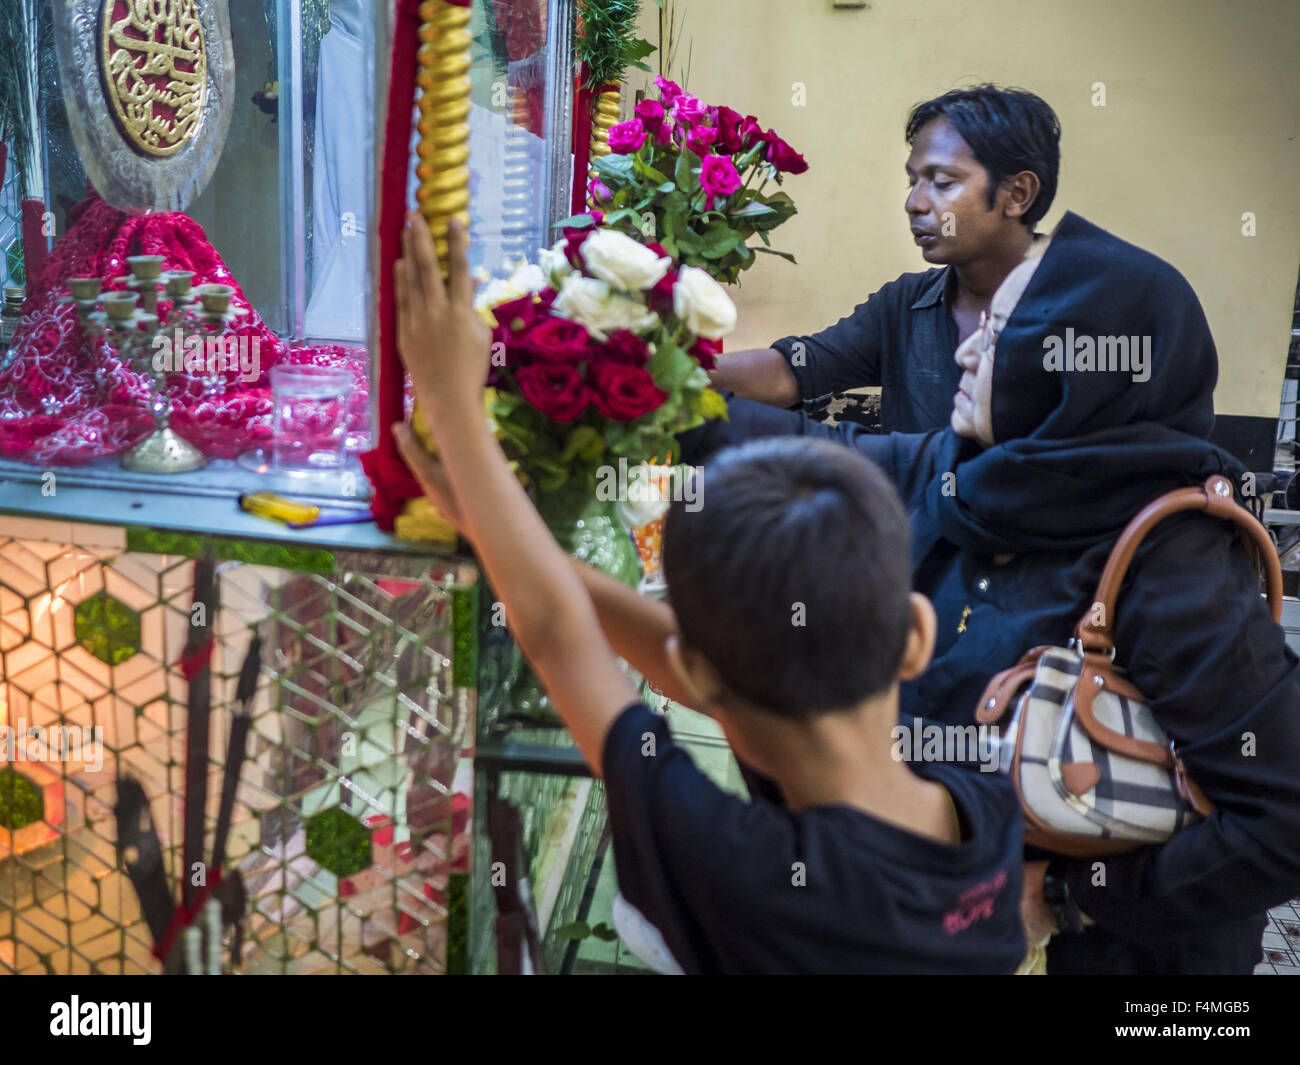 Yangon Division, Myanmar. 20th Oct, 2015. People pray at a shrine for Hussein ibn Ali at Punja Mosque in Yangon. Ashura commemorates the death of Hussein ibn Ali, the grandson of the Prophet Muhammed, in the 7th century. Hussein ibn Ali is considered by Shia Muslims to be the third imam and the rightful successor of Muhammed. He was killed at the Battle of Karbala in 610 CE on the 10th day of Muharram, the first month of the Islamic calendar. According to Myanmar government statistics, only about 4% of the population is Muslim. Credit:  ZUMA Press, Inc./Alamy Live News Stock Photo